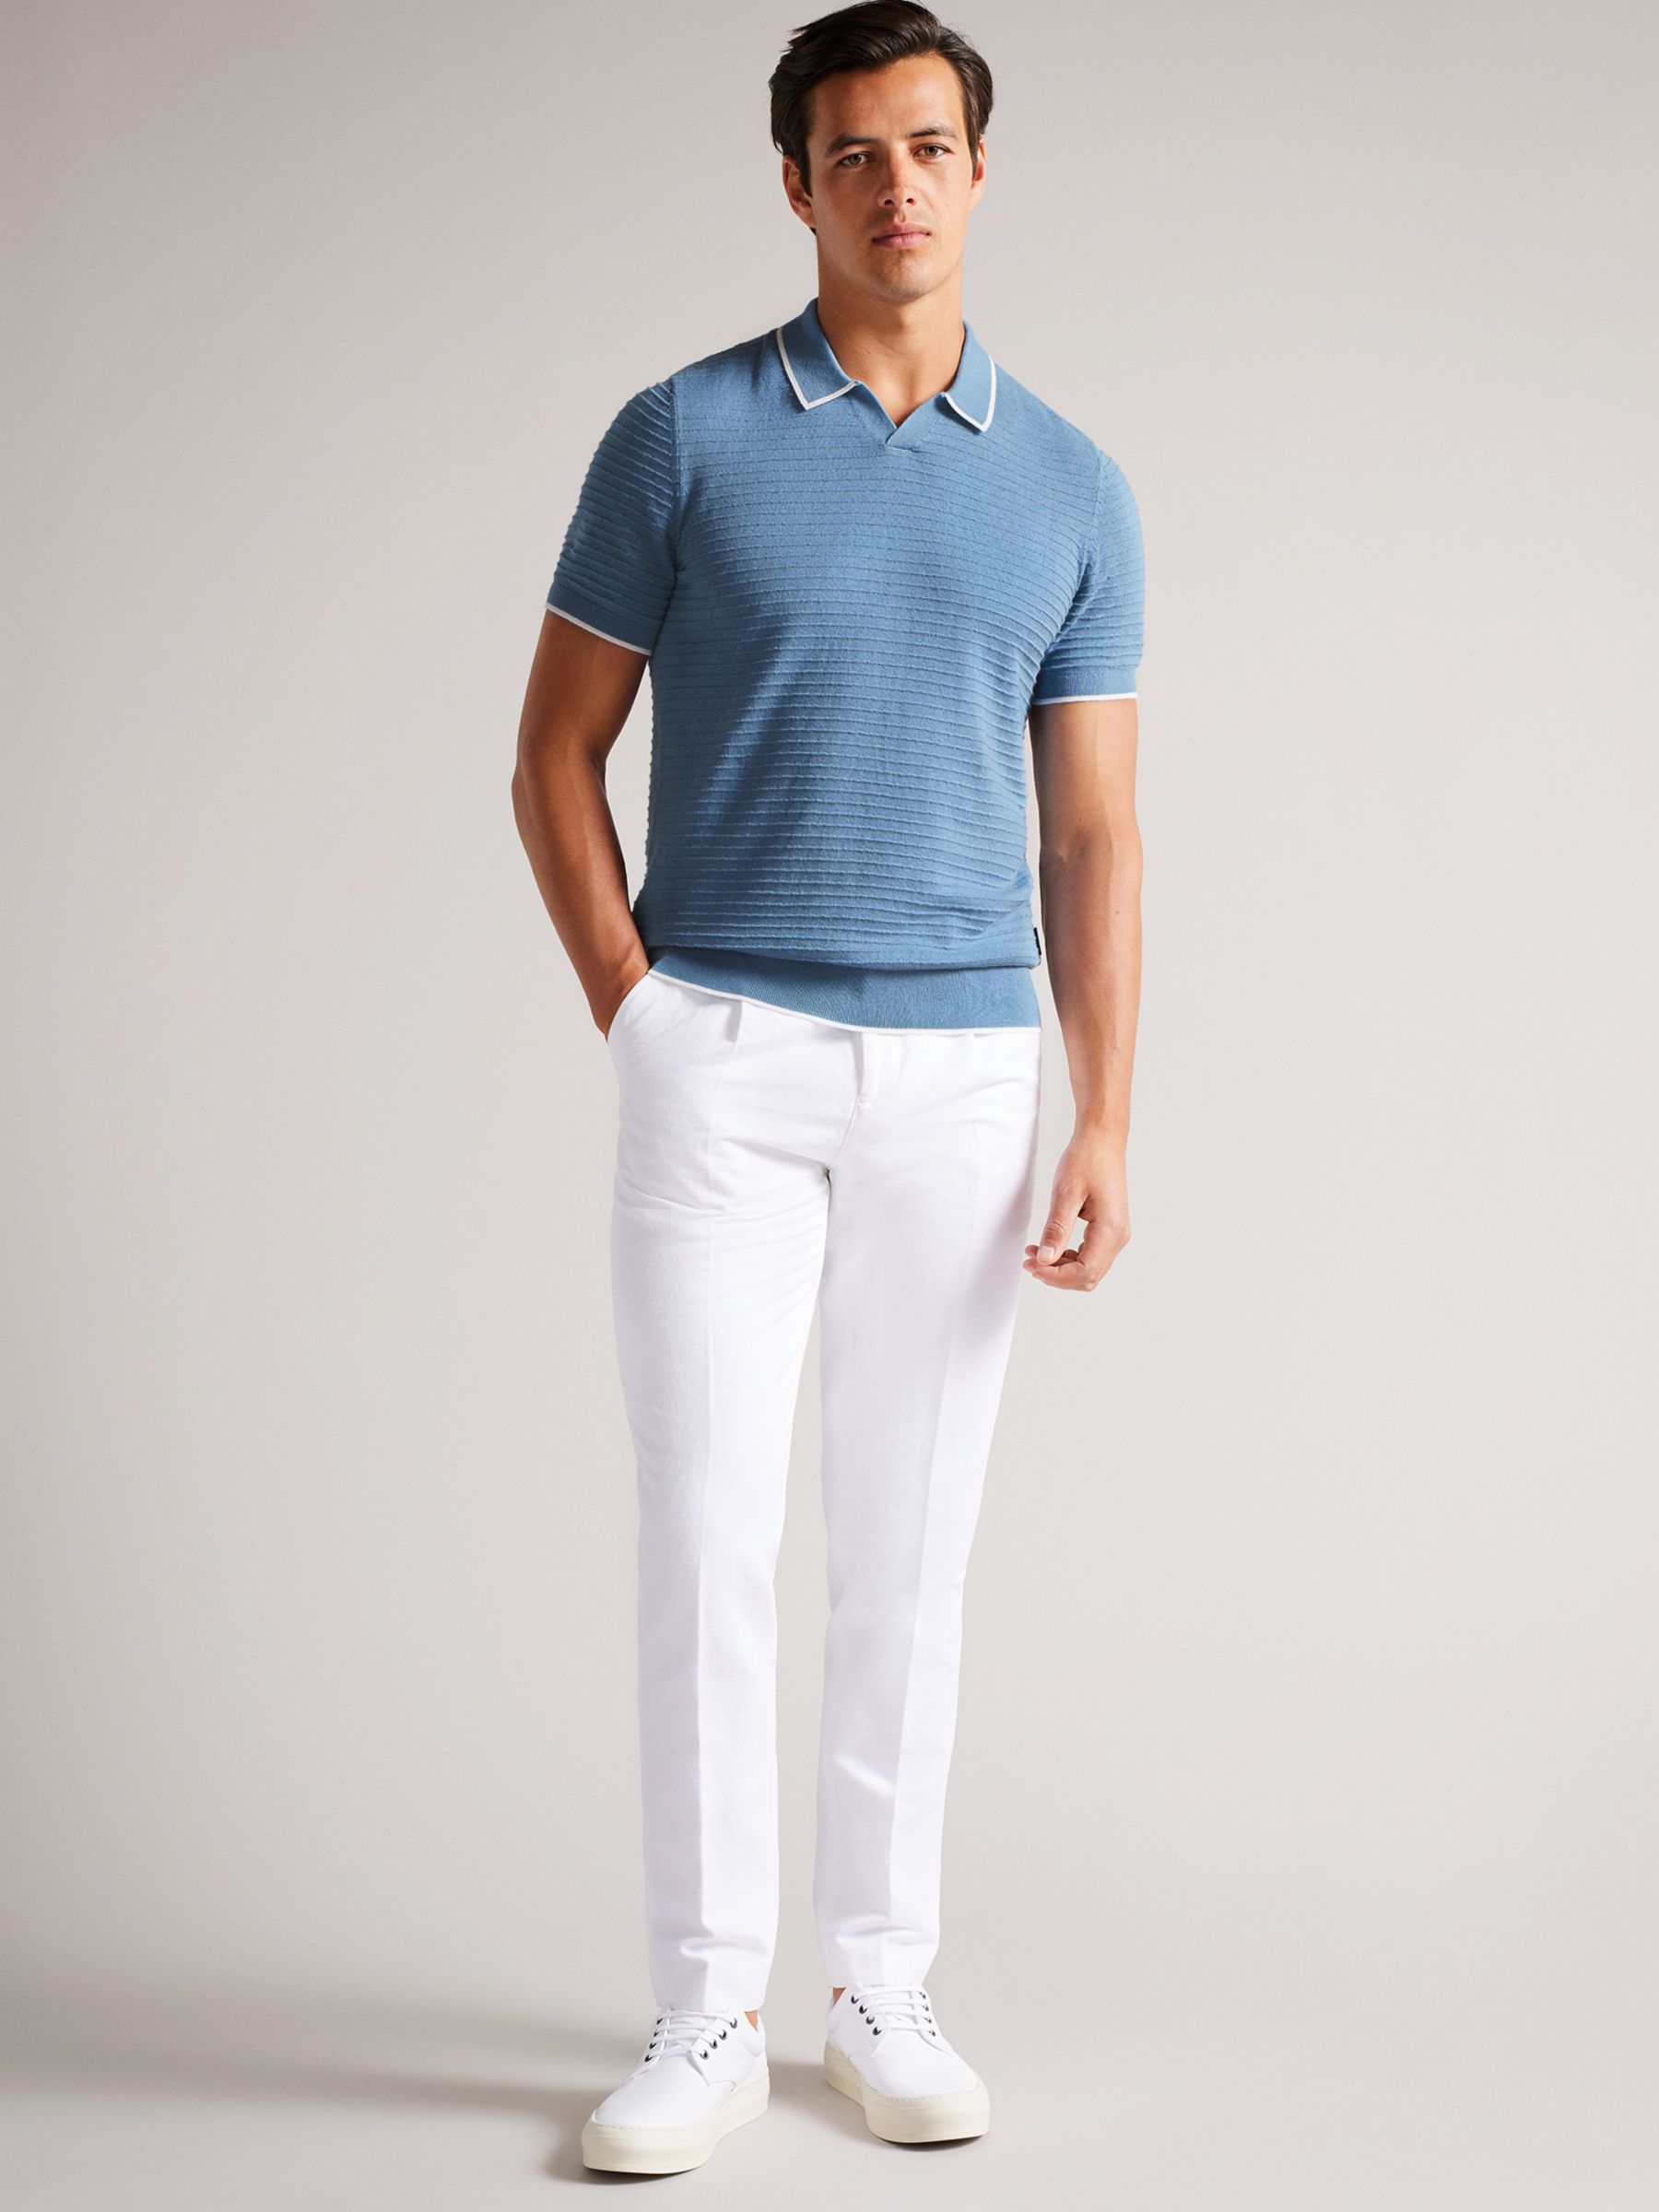 Ted Baker Durdle Textured Stripe Polo Shirt, Sky Blue at John Lewis ...